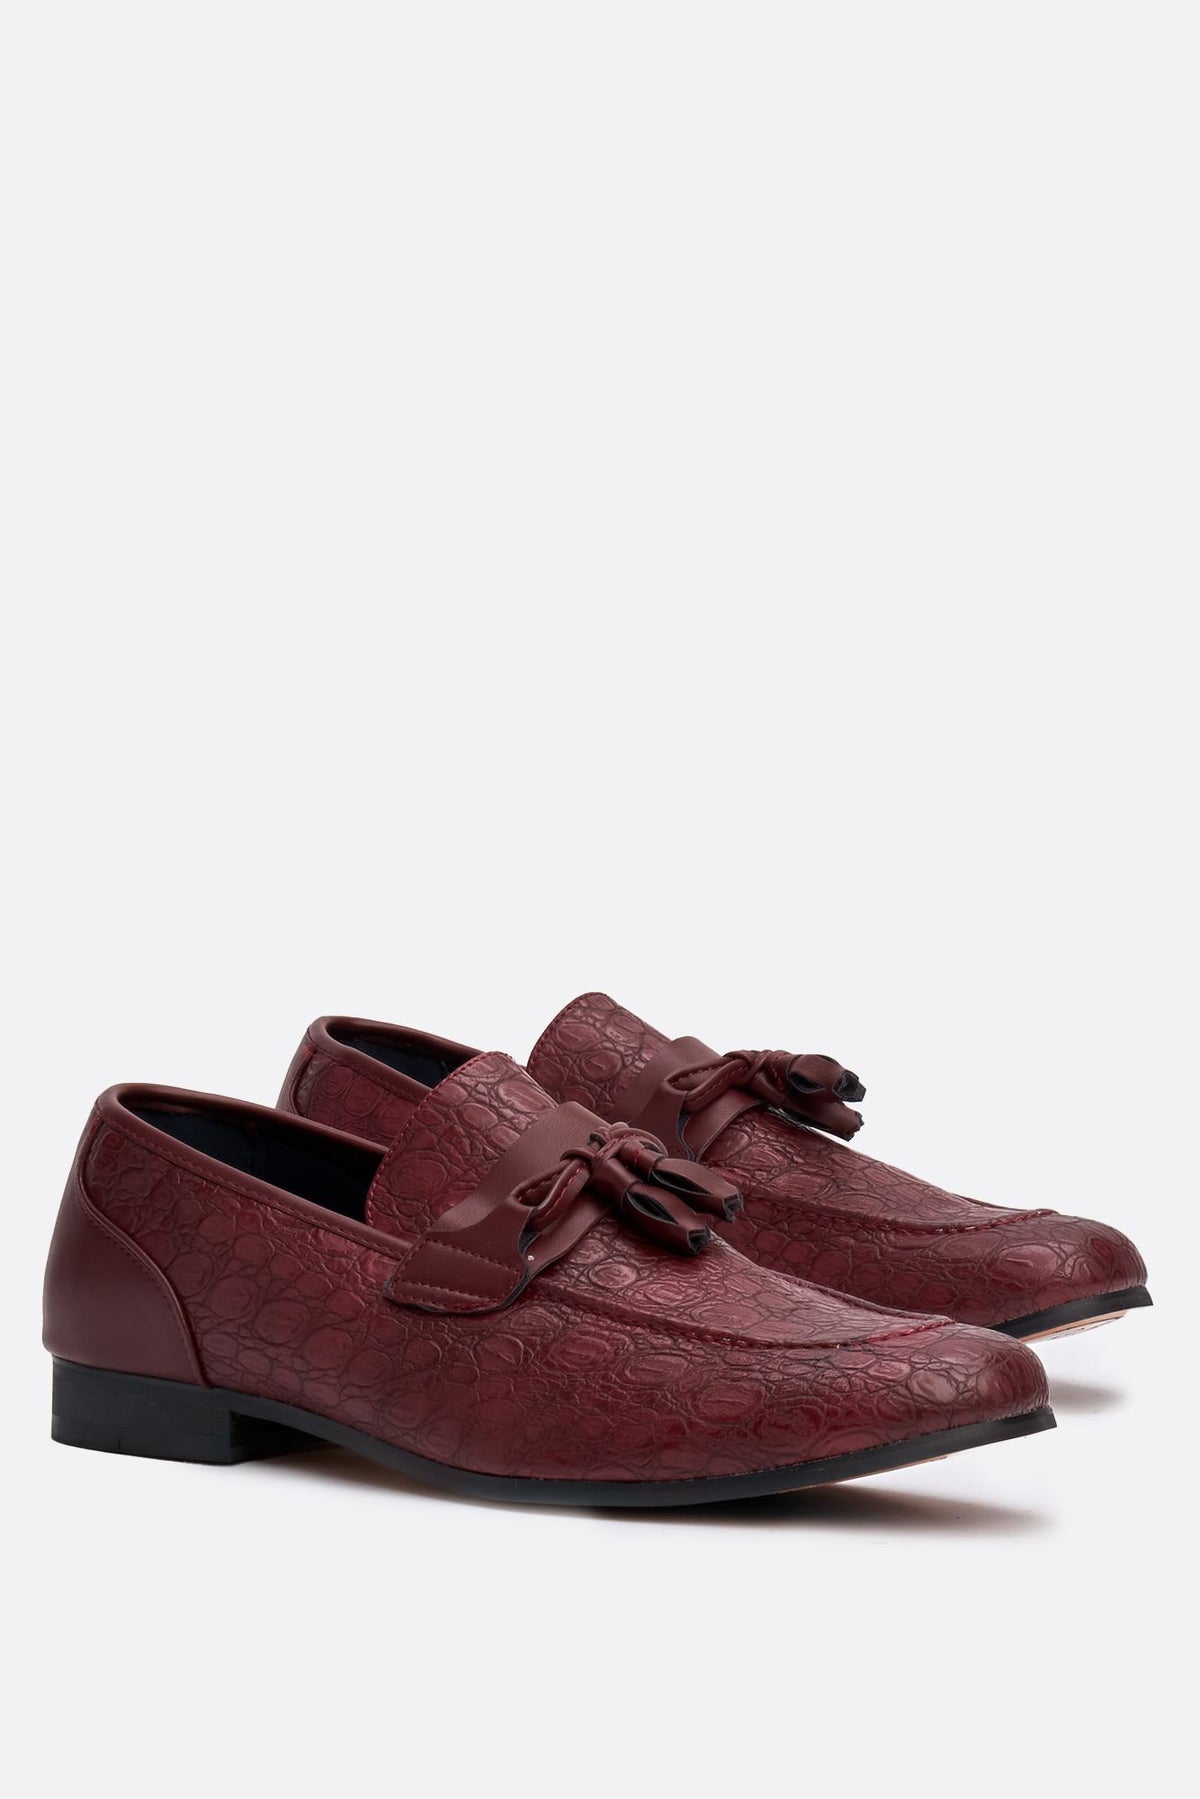 Brindisi Bark Red Loafers